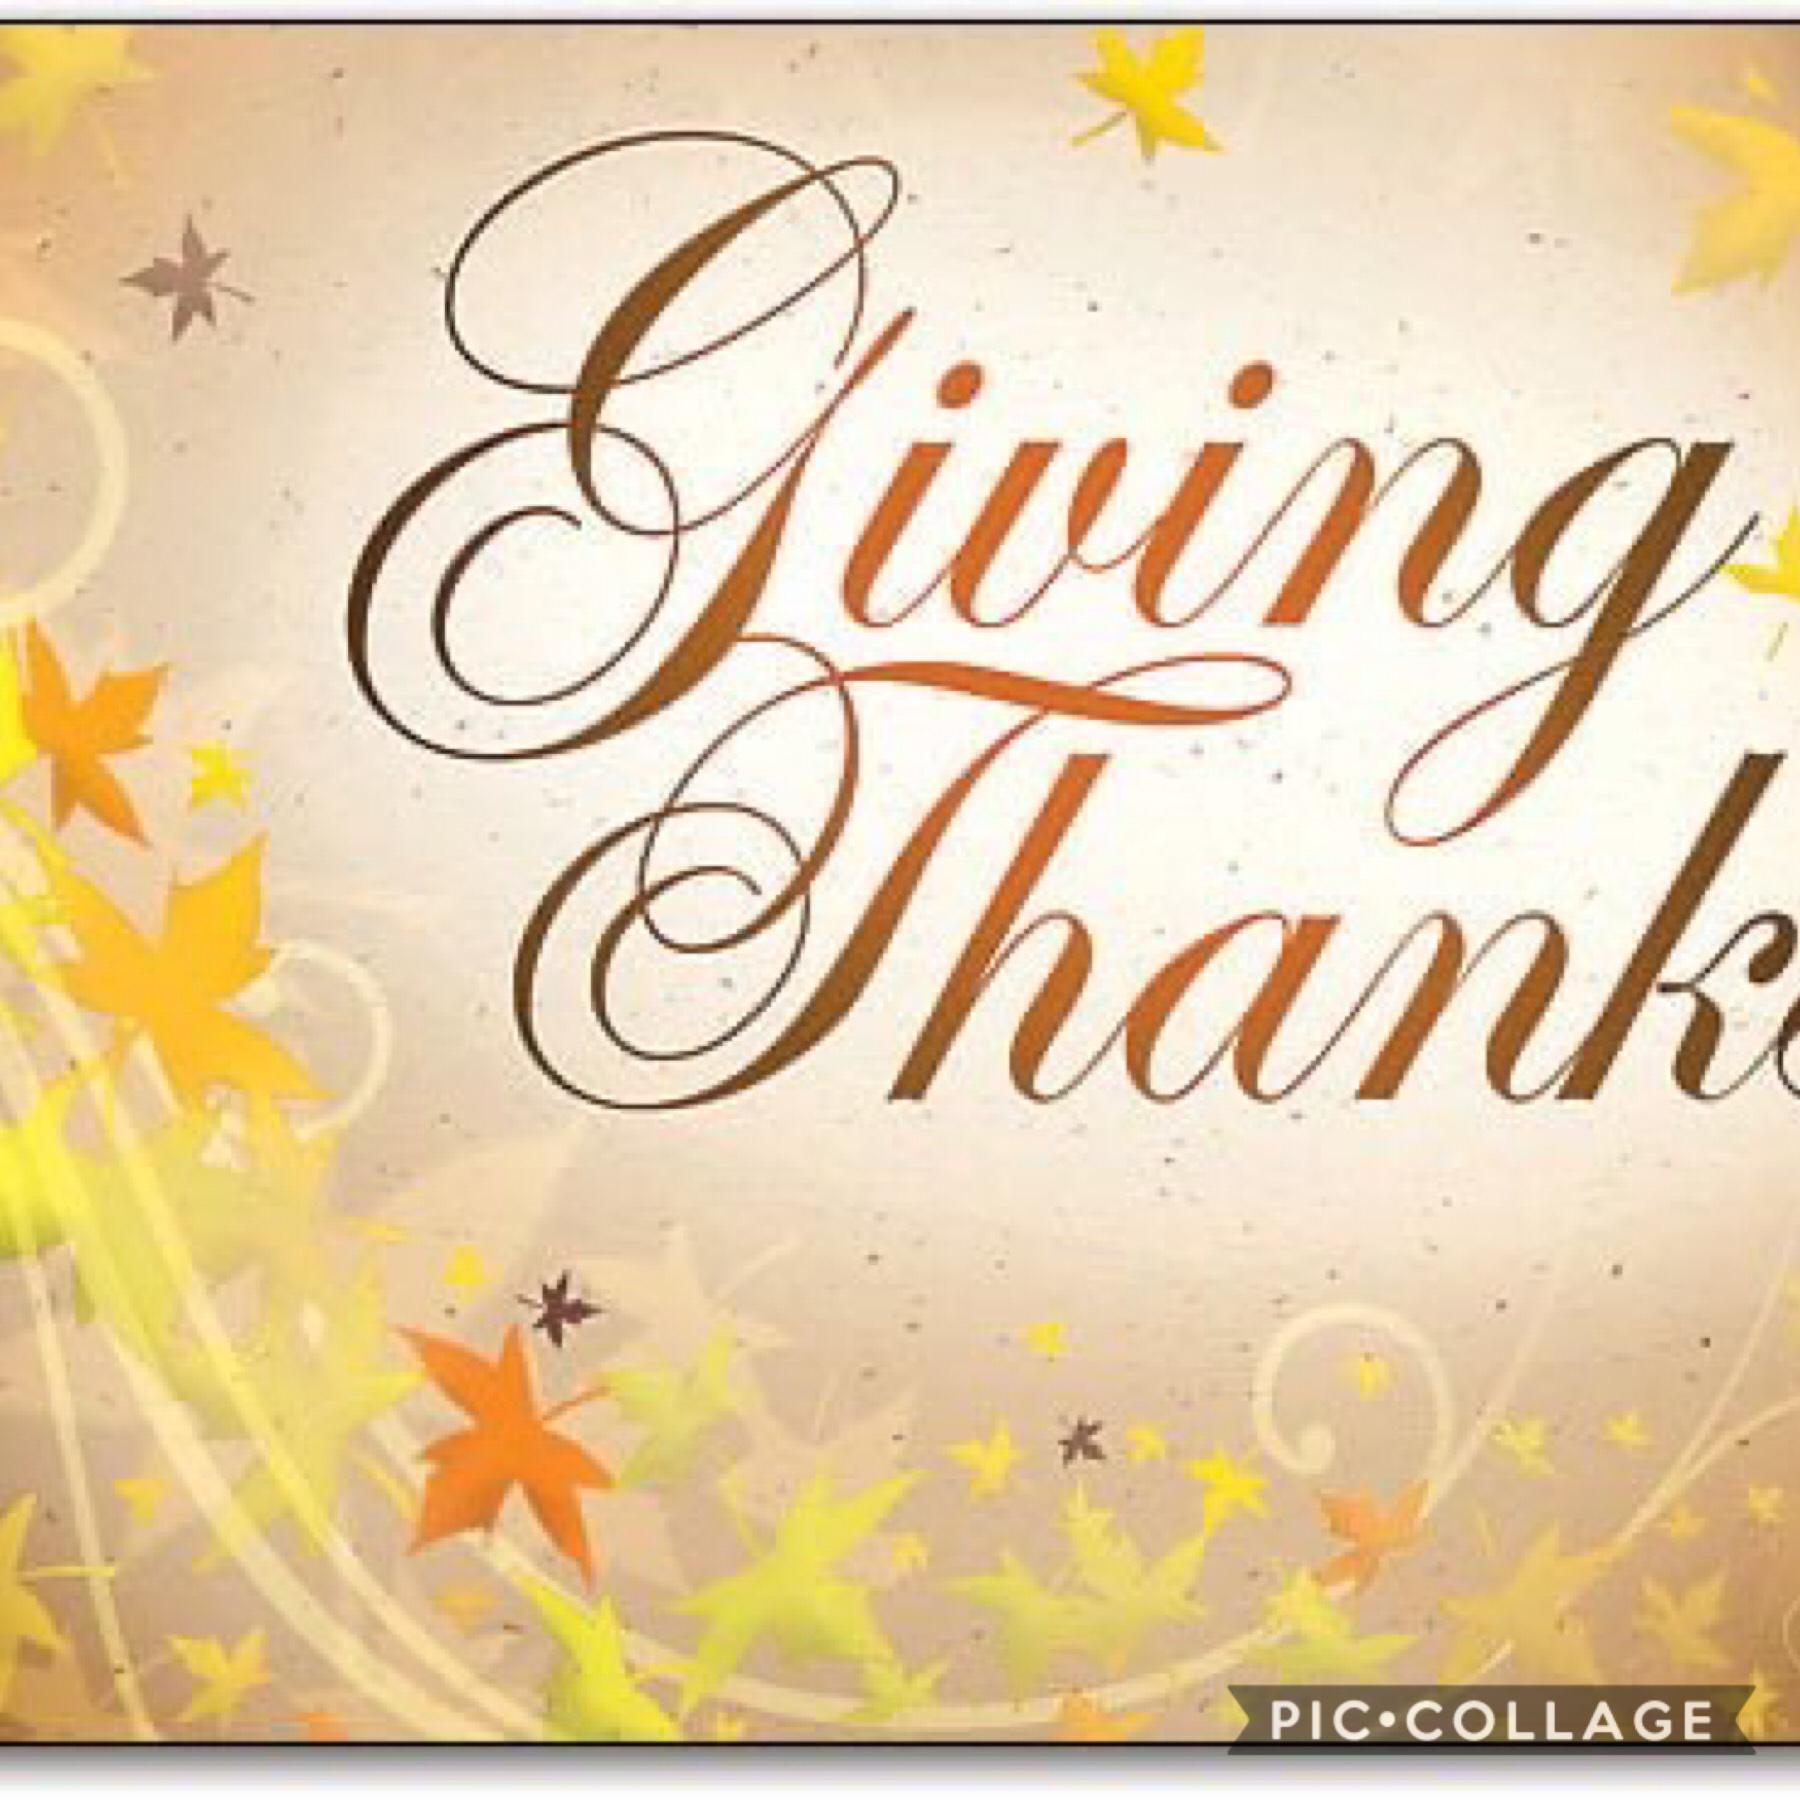 Have a great thanks giving.🍖🥩🍗🥒🥑🥝🥭🍈🍅🥦🥥🥬🌽